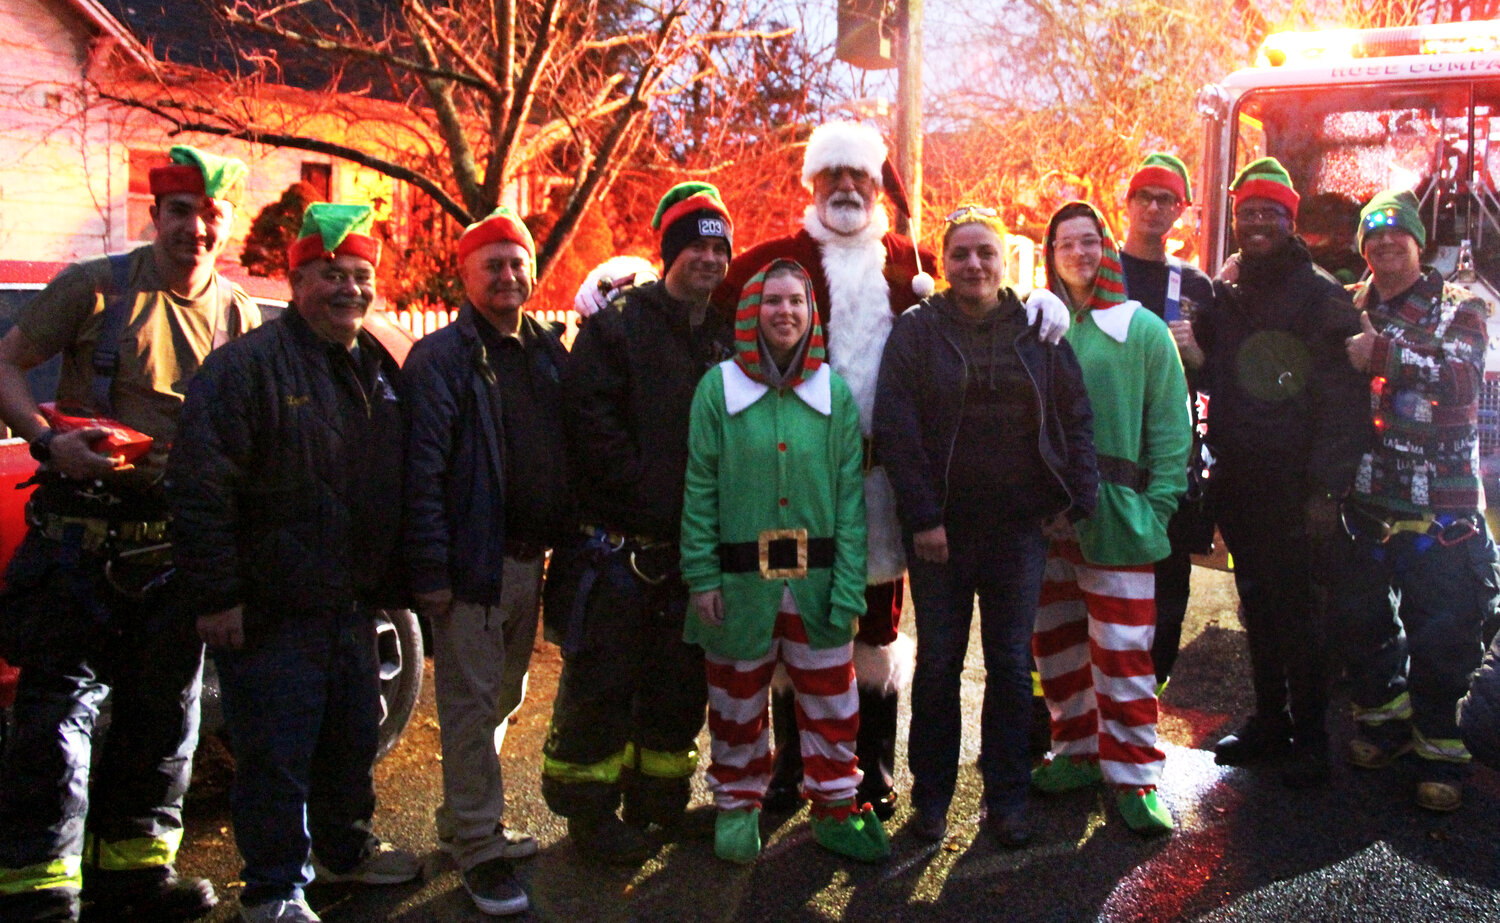 Santa with Liz Giles, in the center, and the Baldwin Fire Department Company Hose 3.